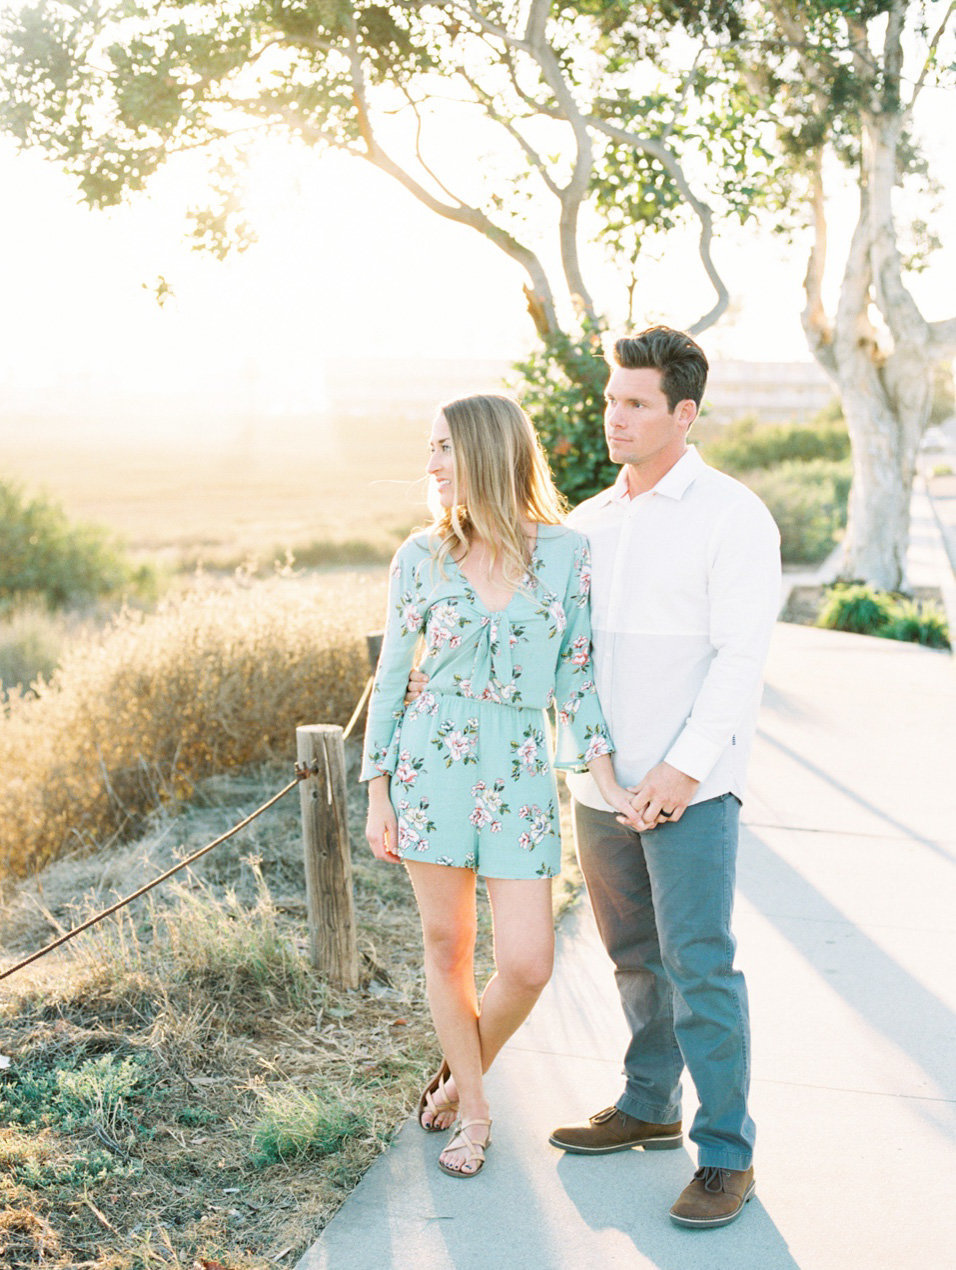 San-Diego-Engagement-Photographer-Mandy-Ford-002